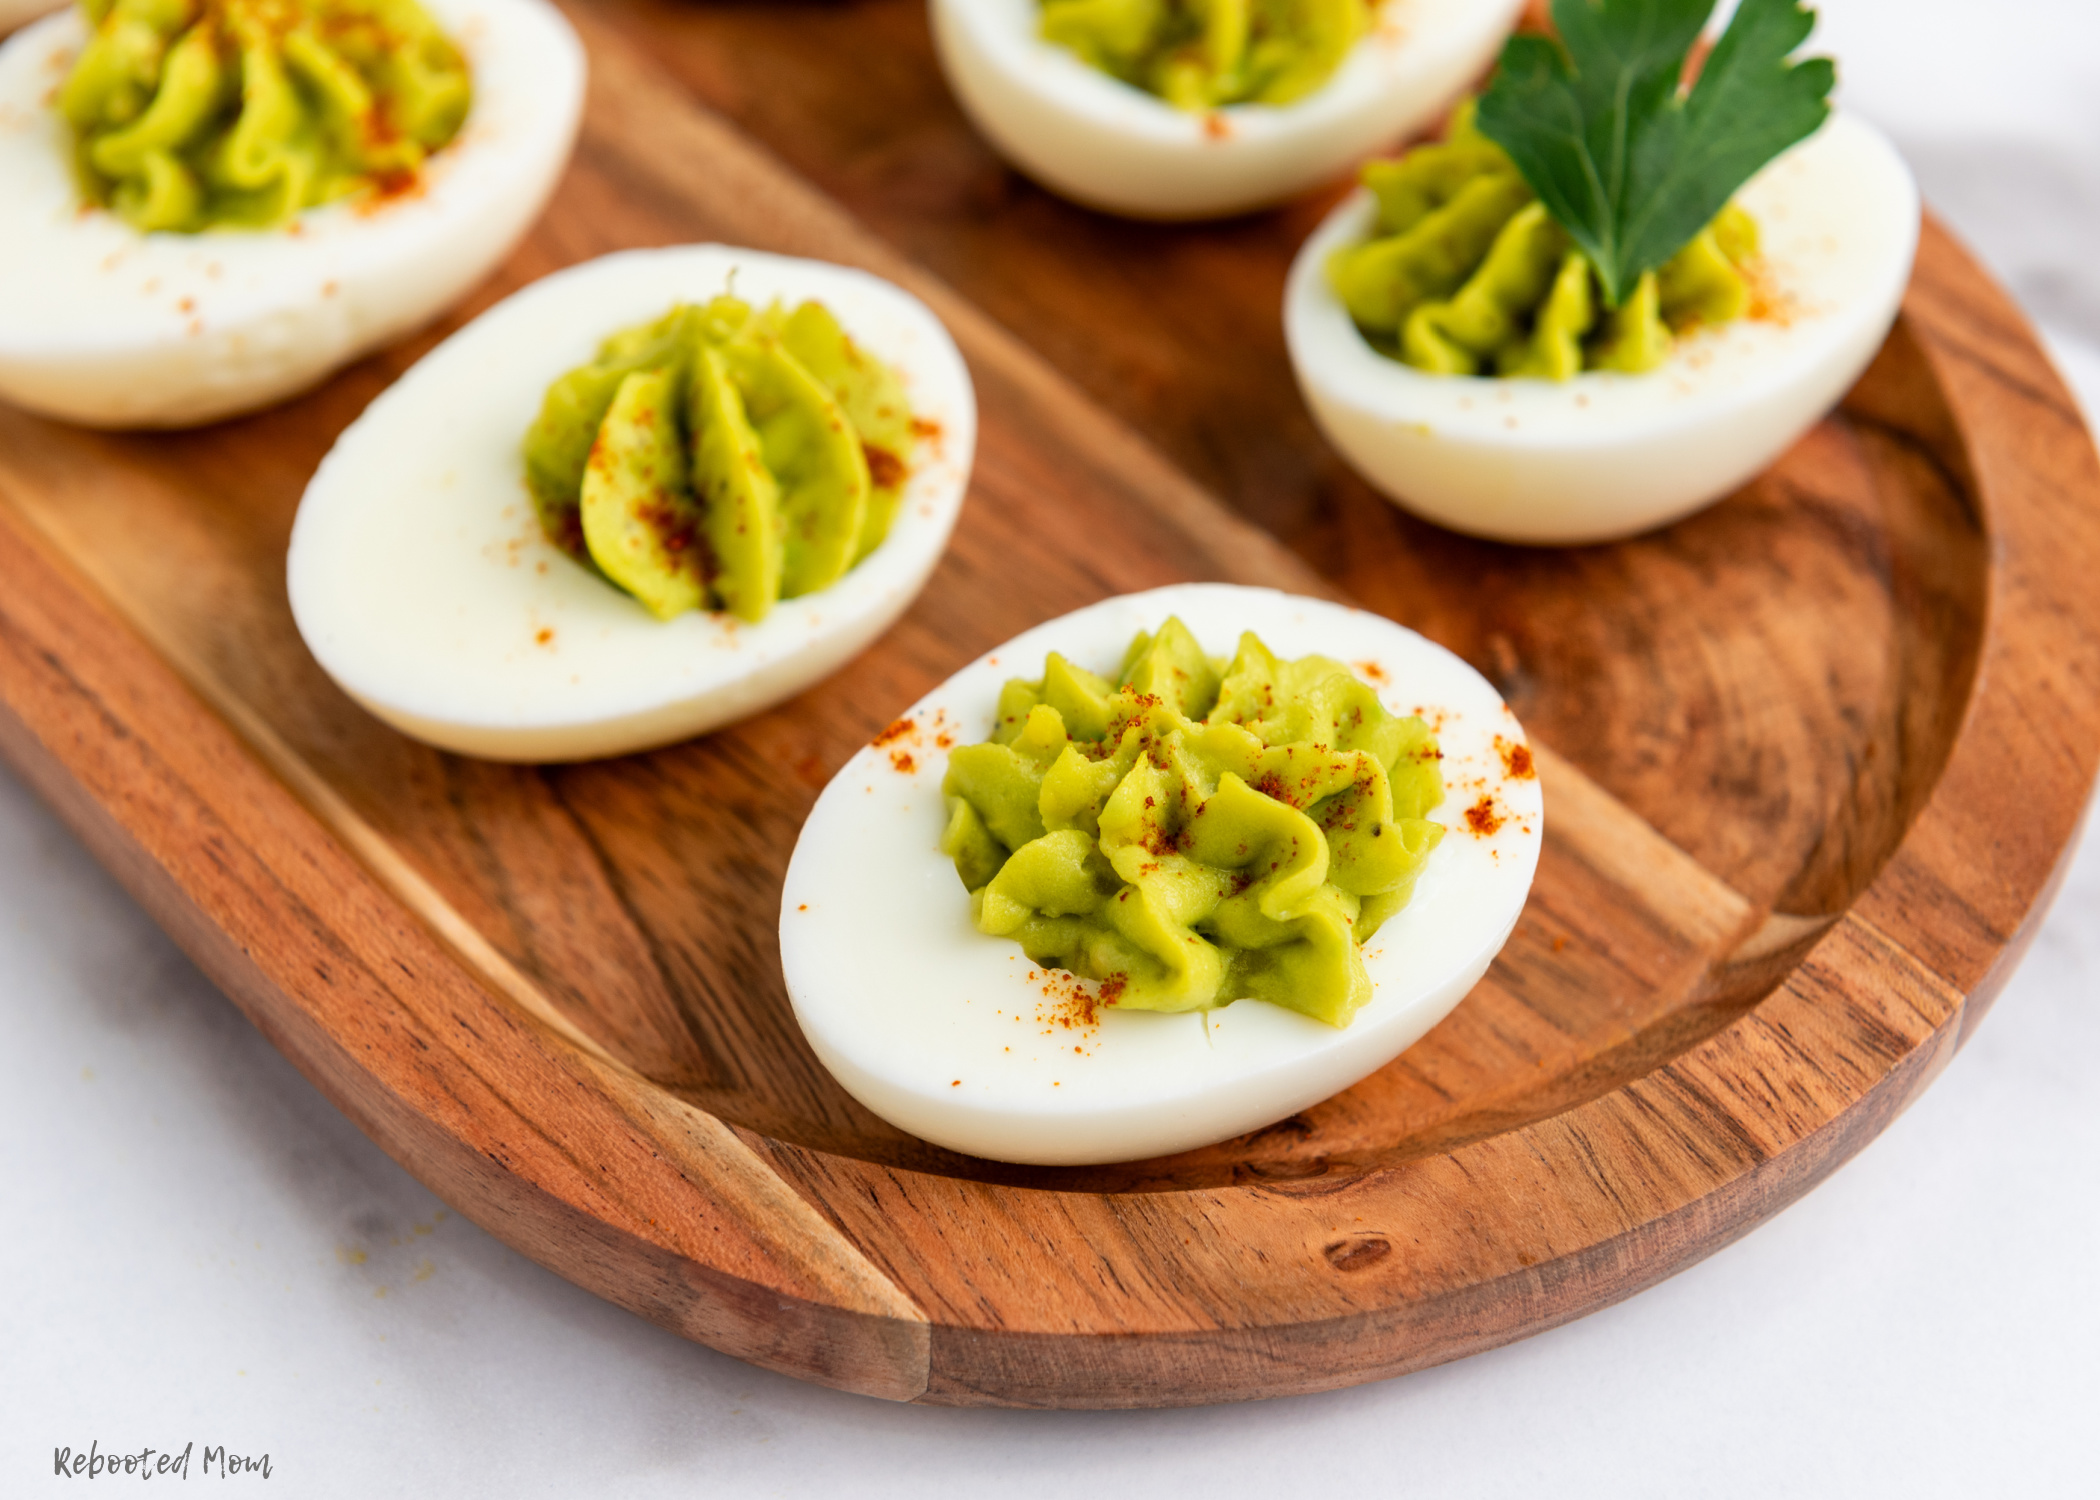 These Keto Avocado Deviled Eggs are a beautiful twist on a classic appetizer ~ brought together with just a few simple ingredients, while being keto-friendly and low-carb!